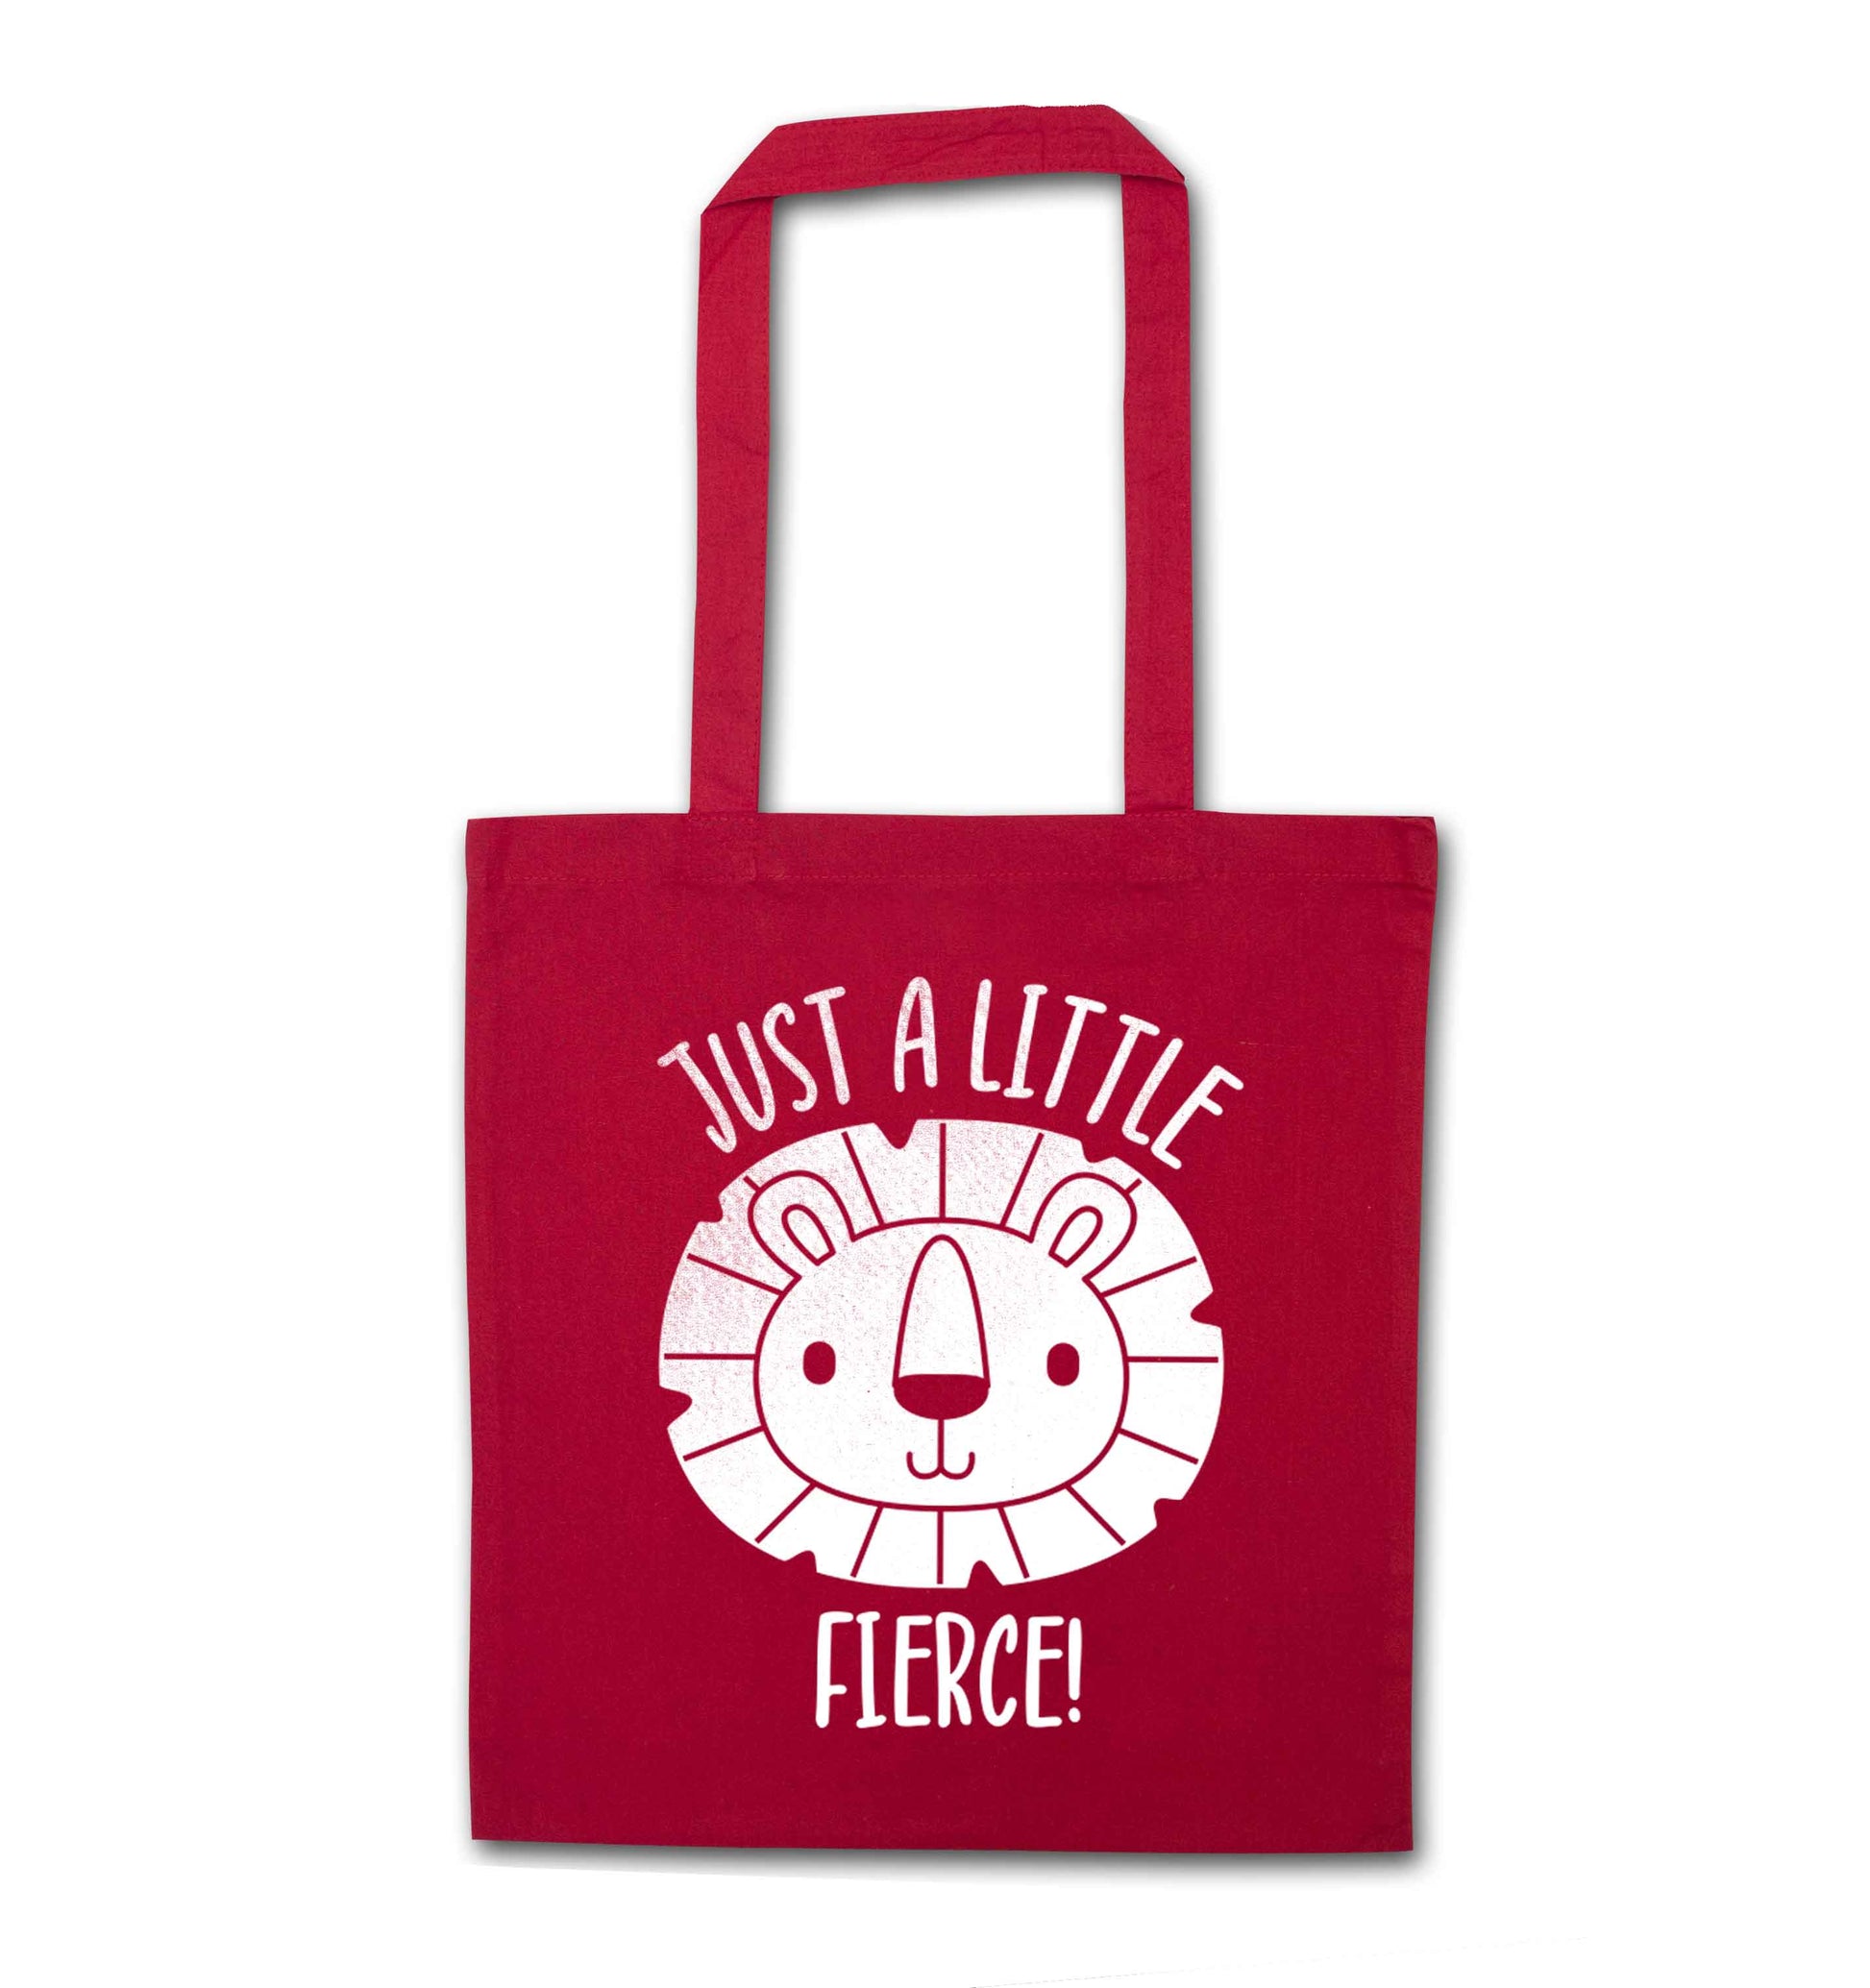 Just a little fierce red tote bag